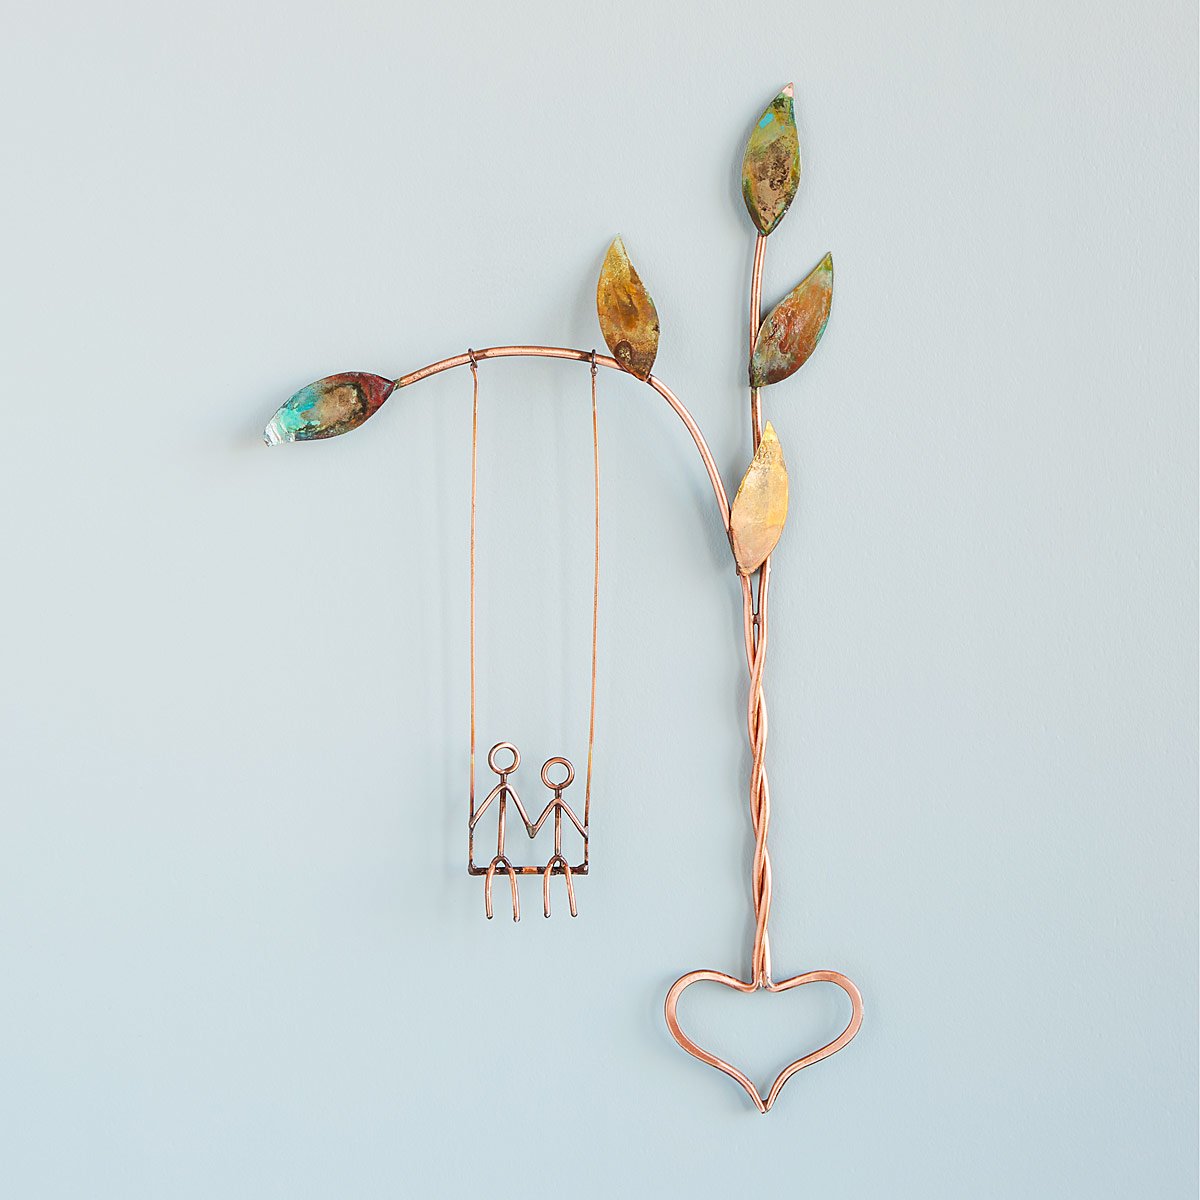 Rooted in Love Swing Sculpture | UncommonGoods